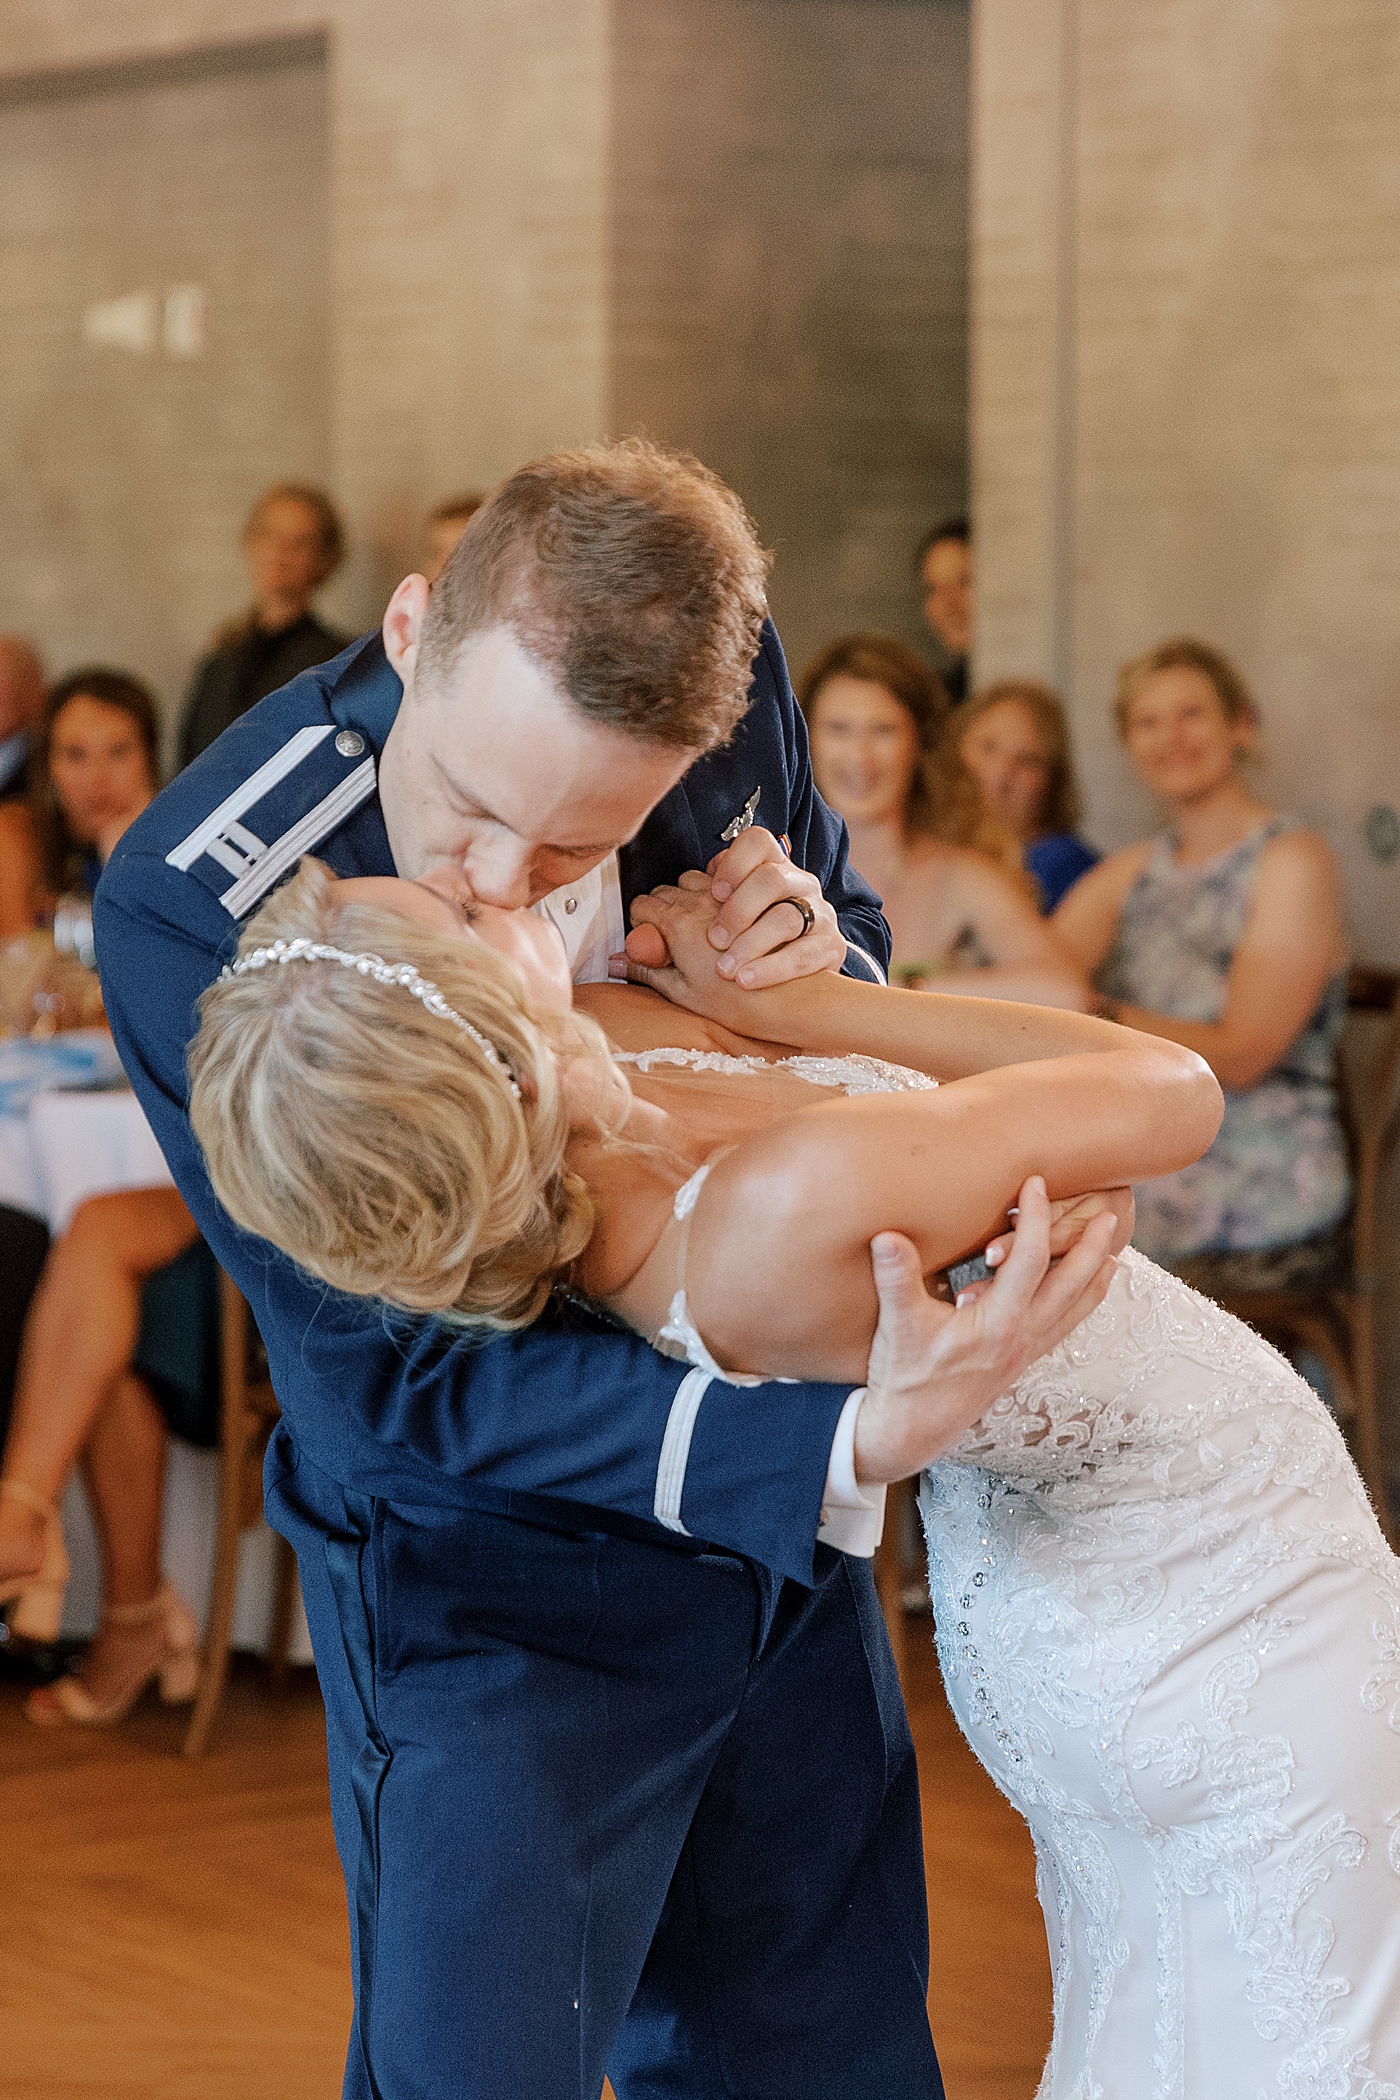 Bride and groom kiss during their first dance | Image by Hope Helmuth Photography